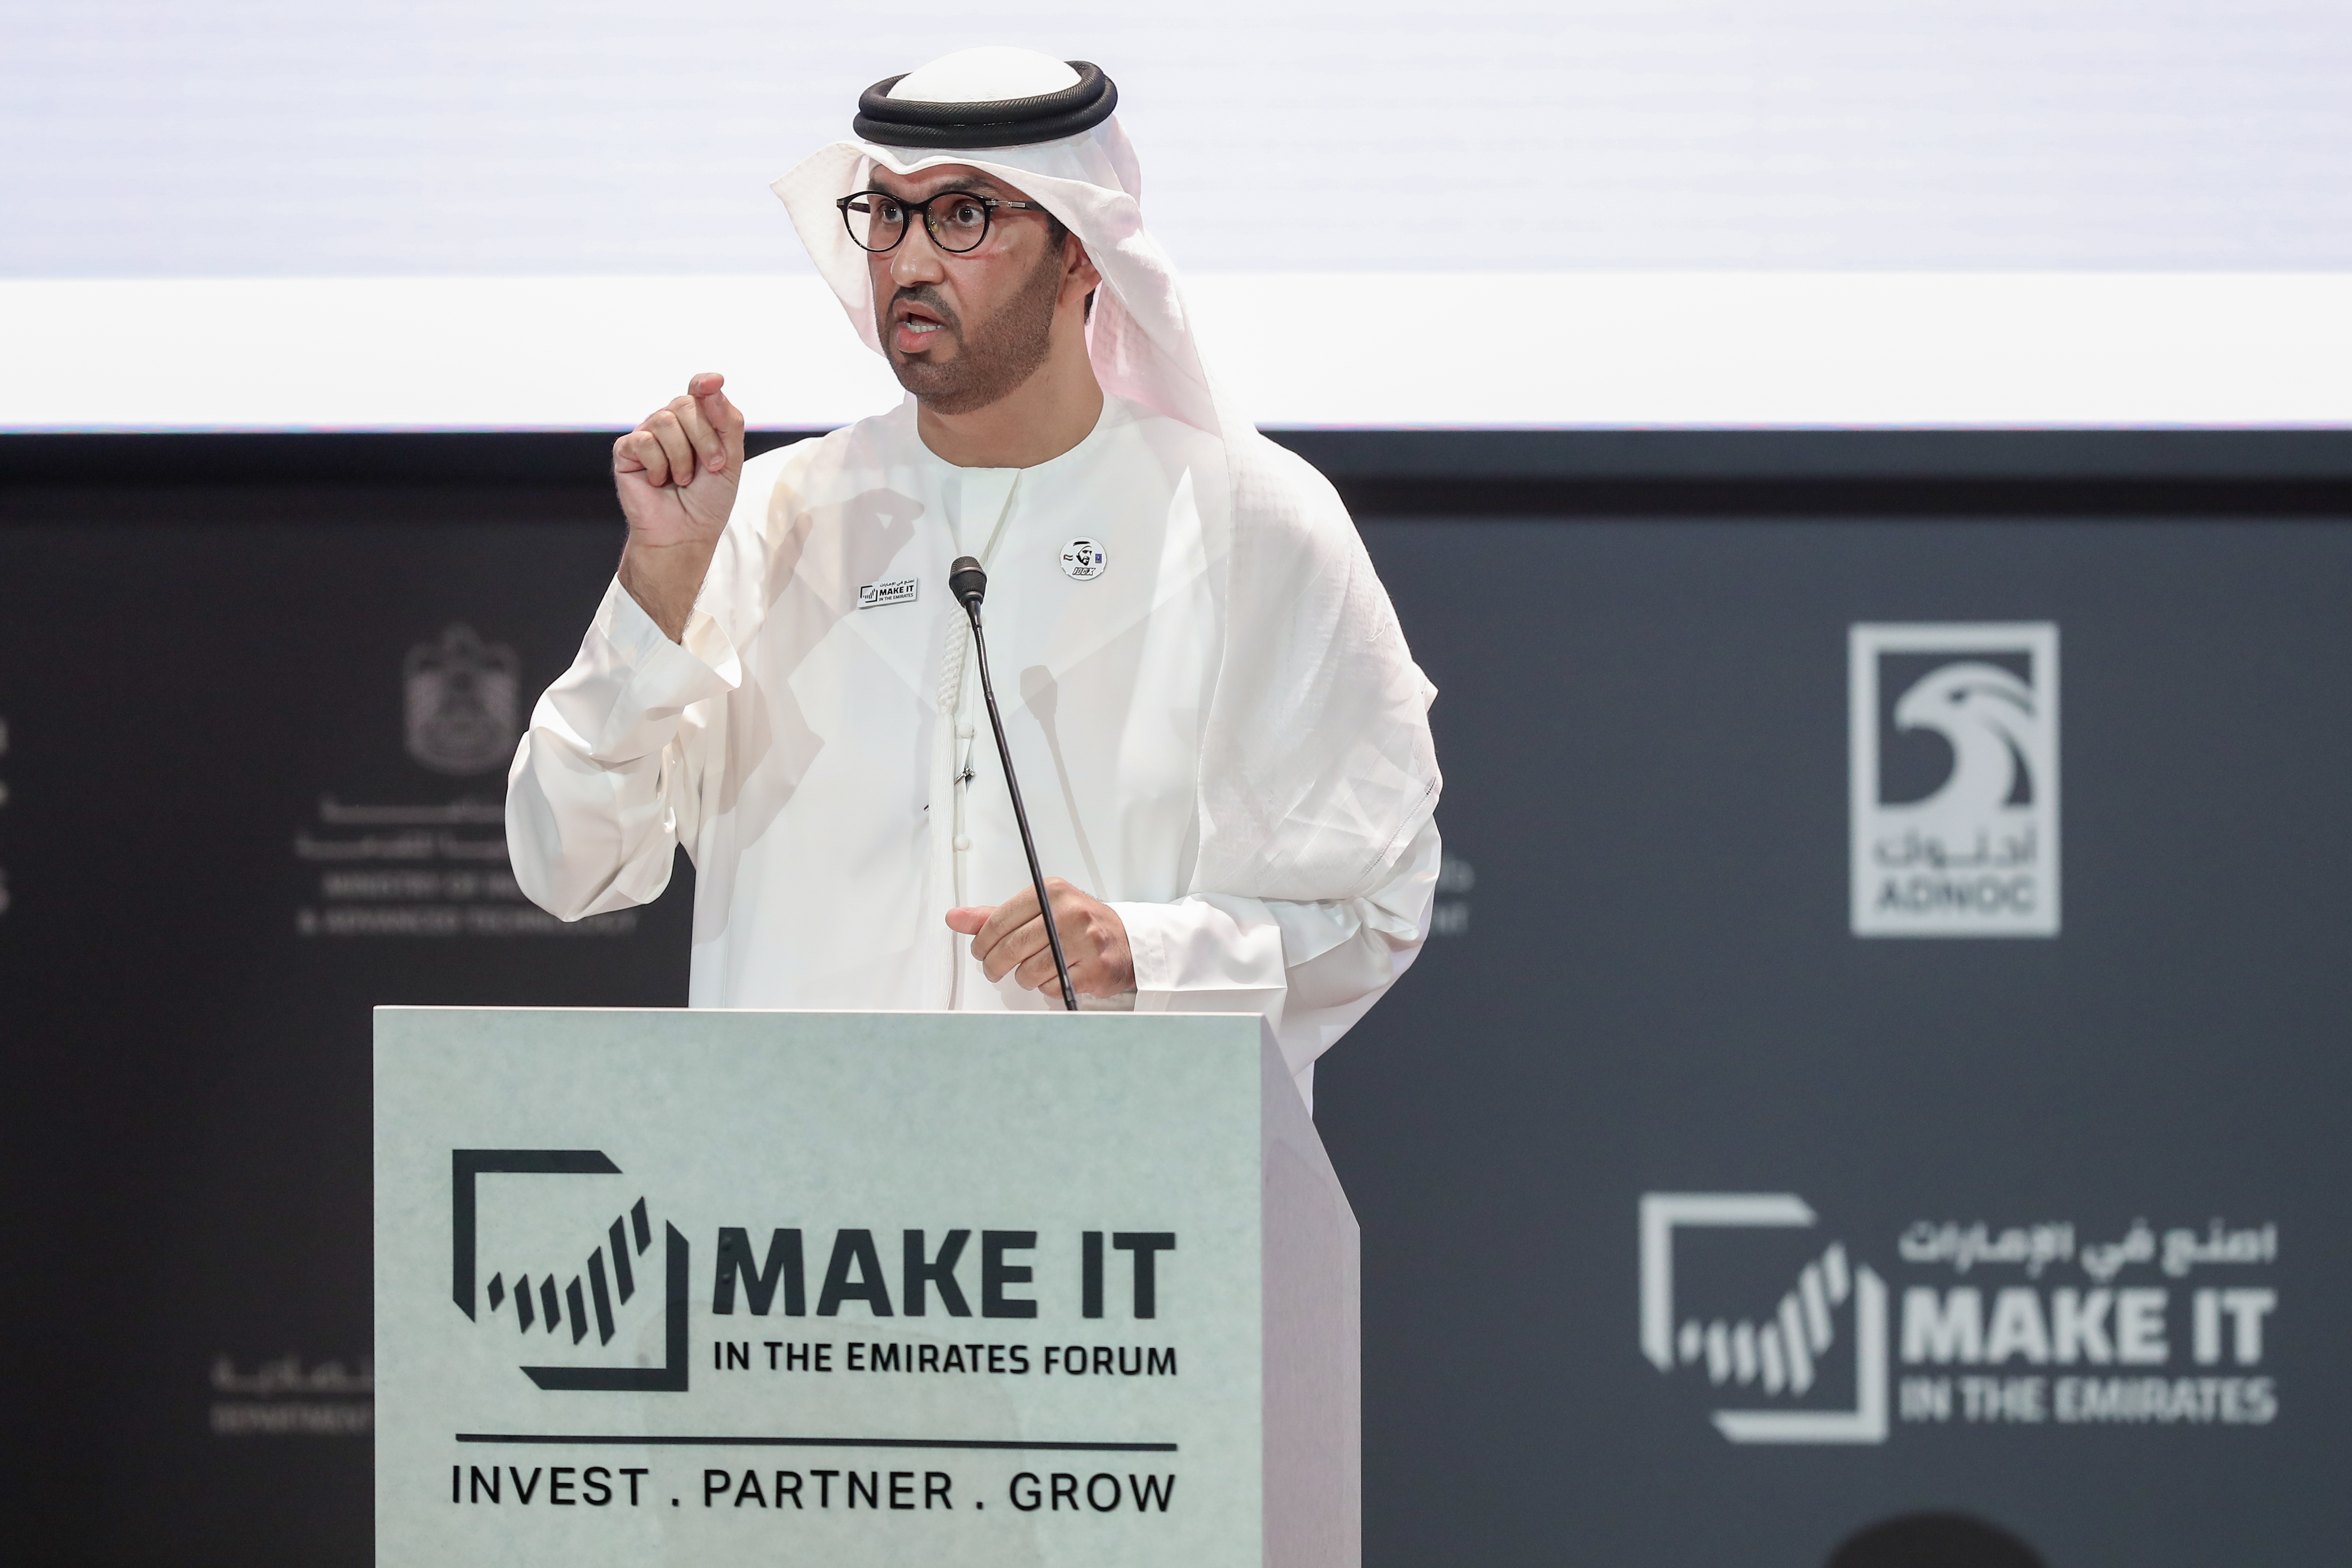  ‘UAE’s leadership supports the transformation of the industrial sector into a global manufacturing hub’, says Minister of Industry and Advanced Technology at Make it in the Emirates Forum 